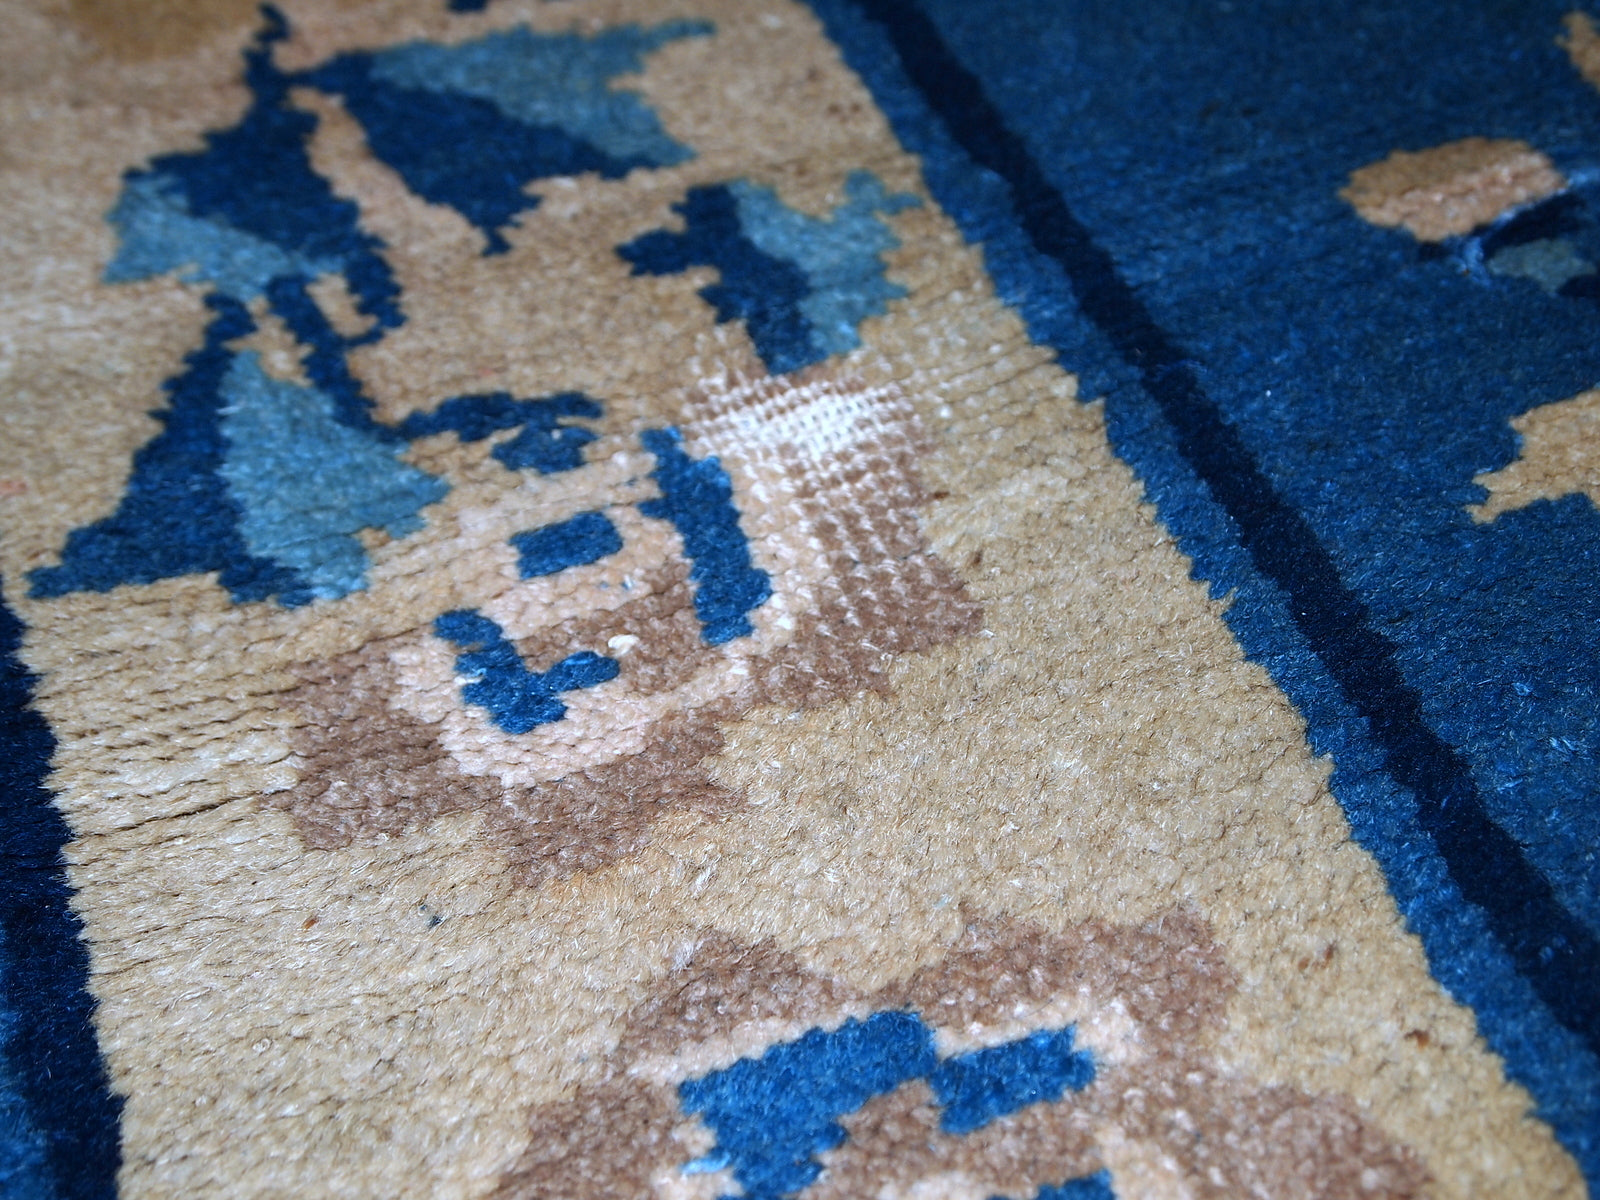 Detailed view of the partially damaged second end of the rug.